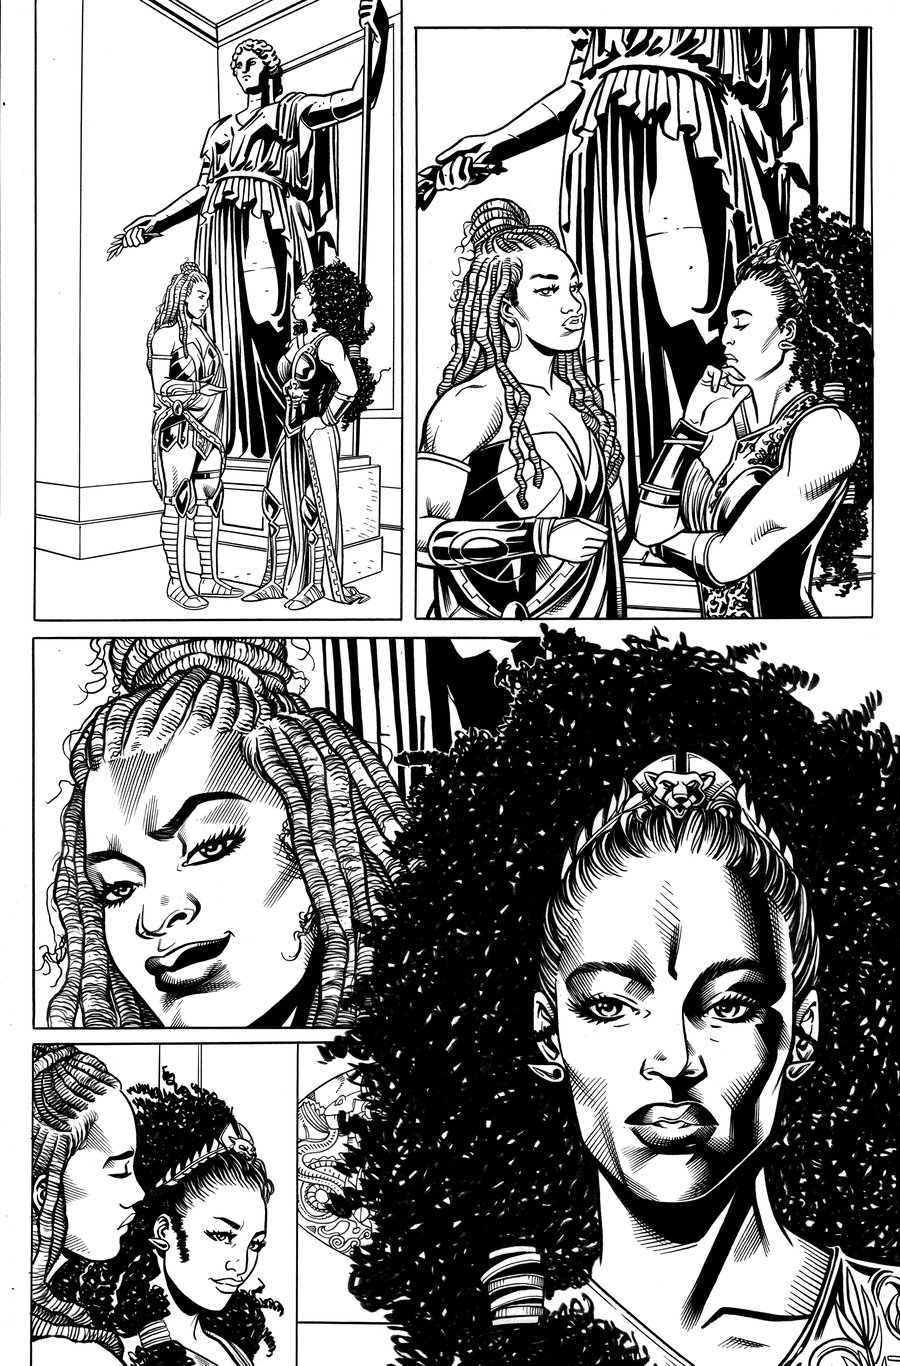 Image of Nubia and the Amazons #1 PG 17